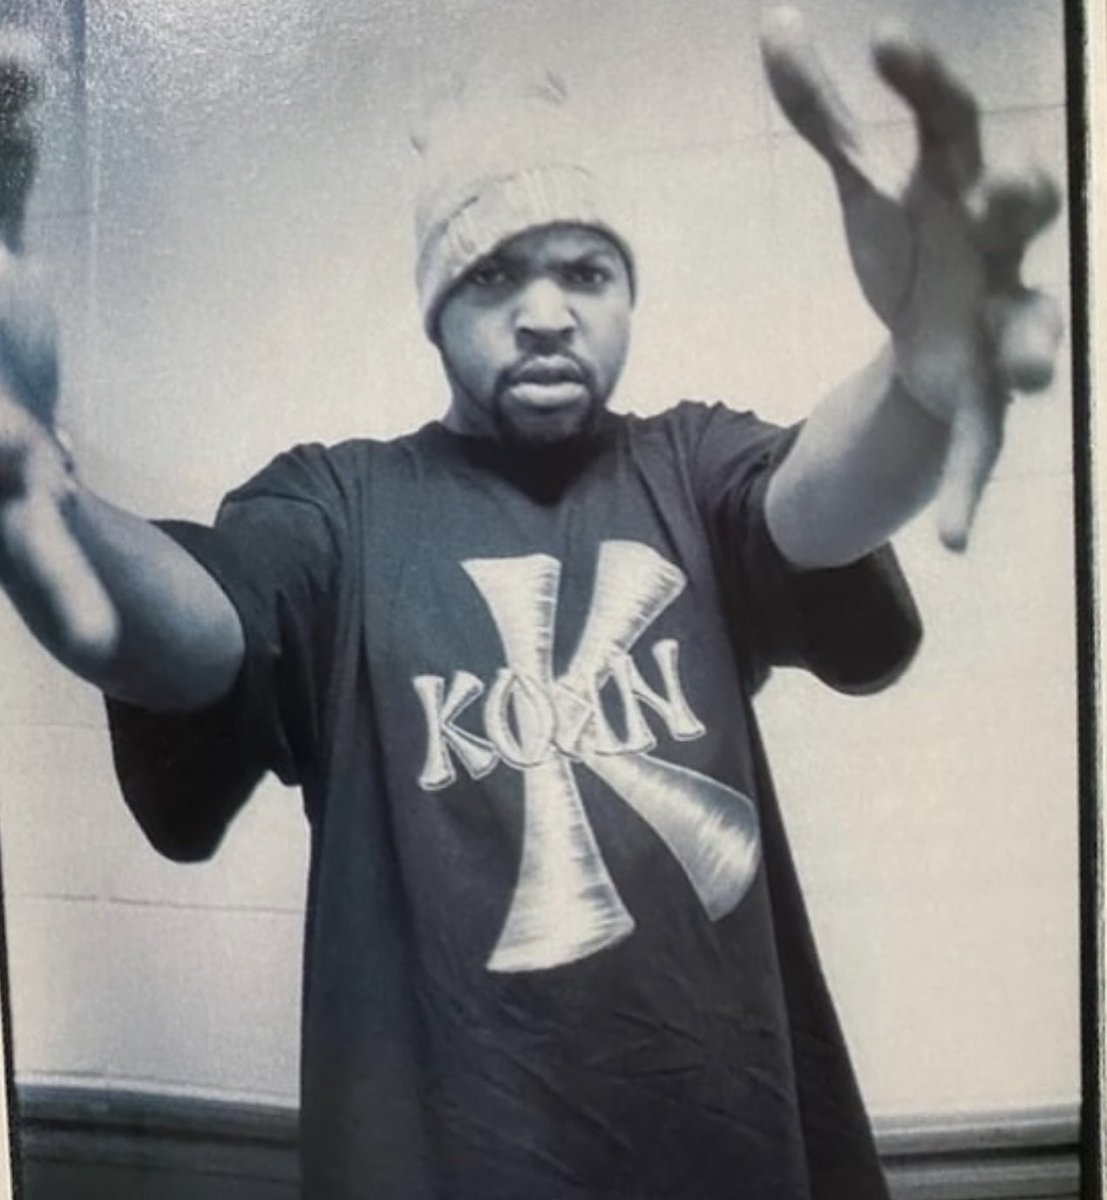 Ice Cube wearing a Korn shirt, you are so wise